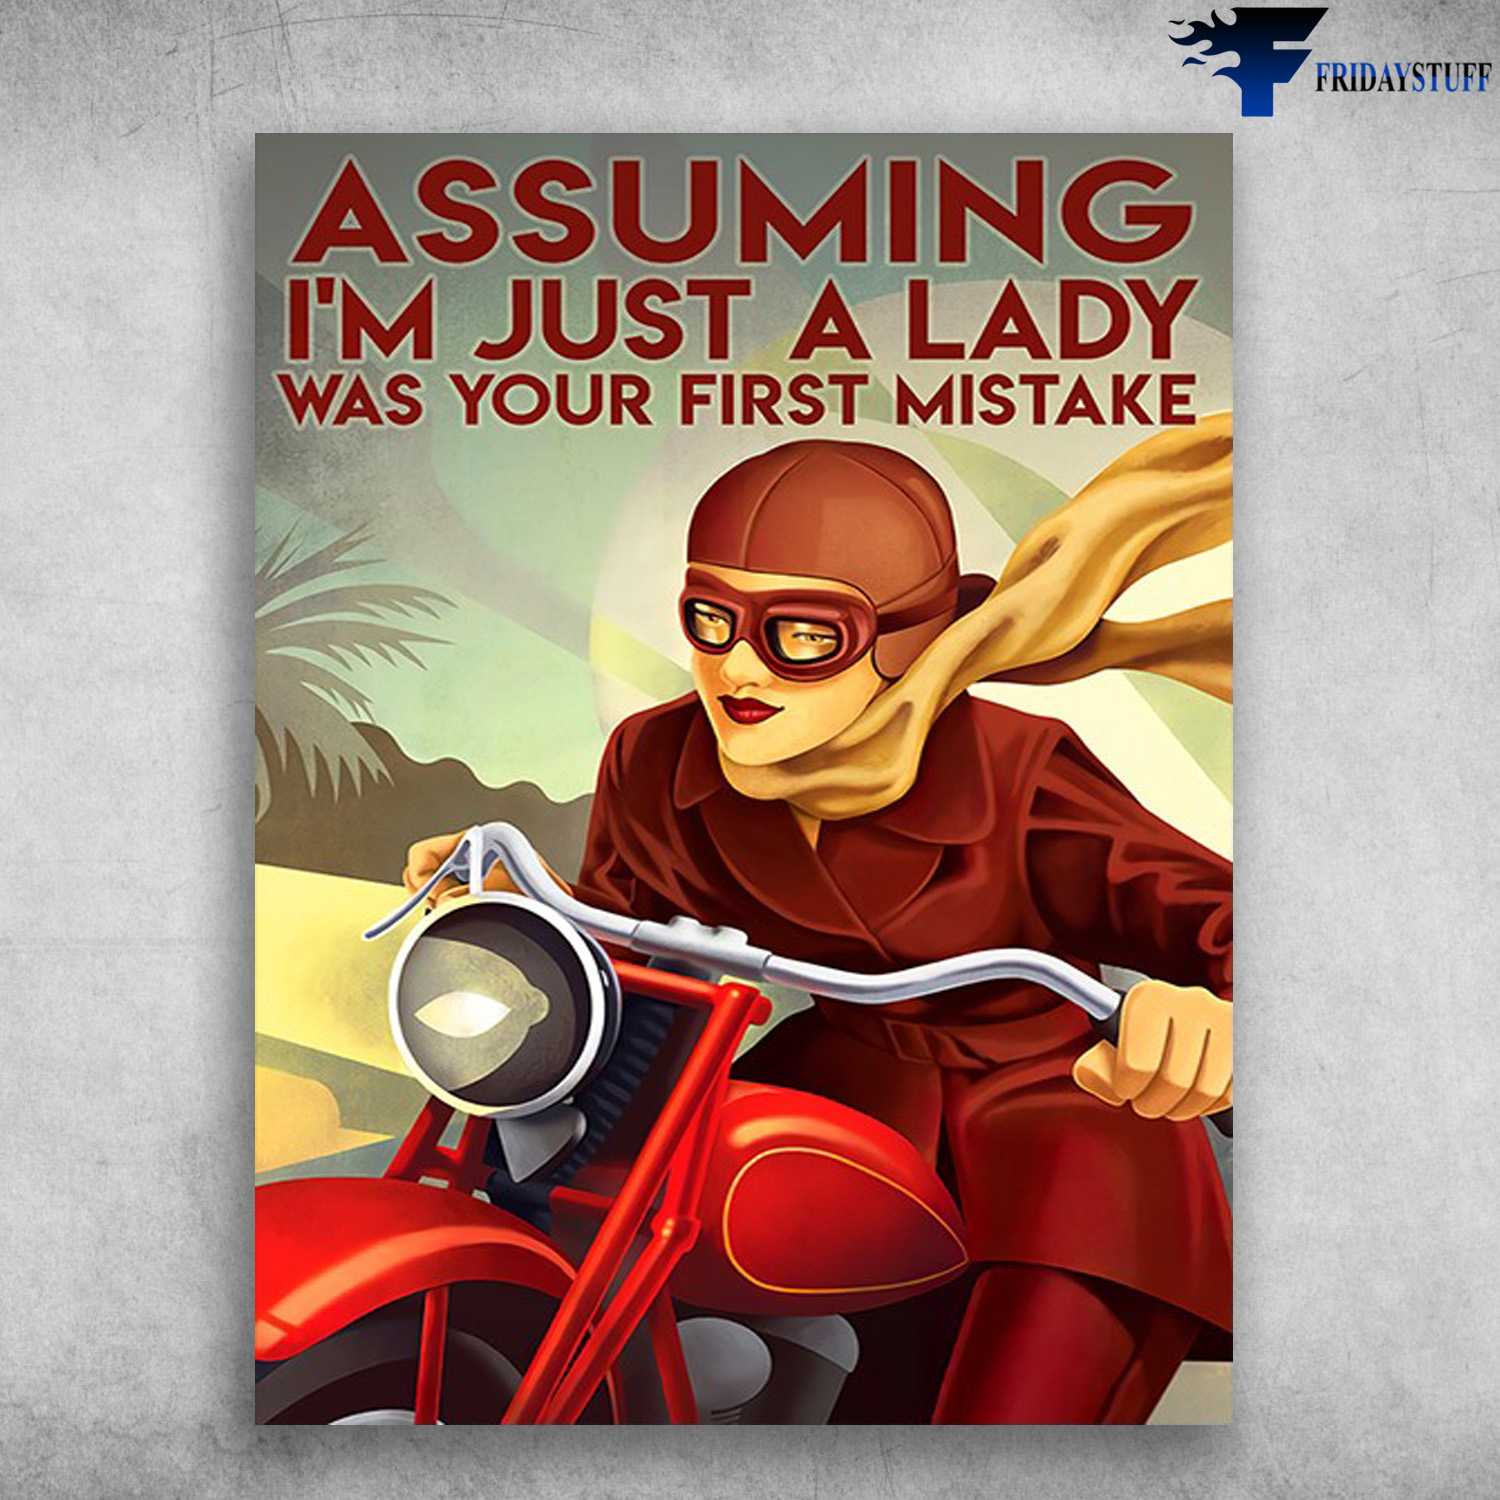 Lady Riding, Motorcycler Lover - Assuming I'm Just A Lady, Was Your First Mistake